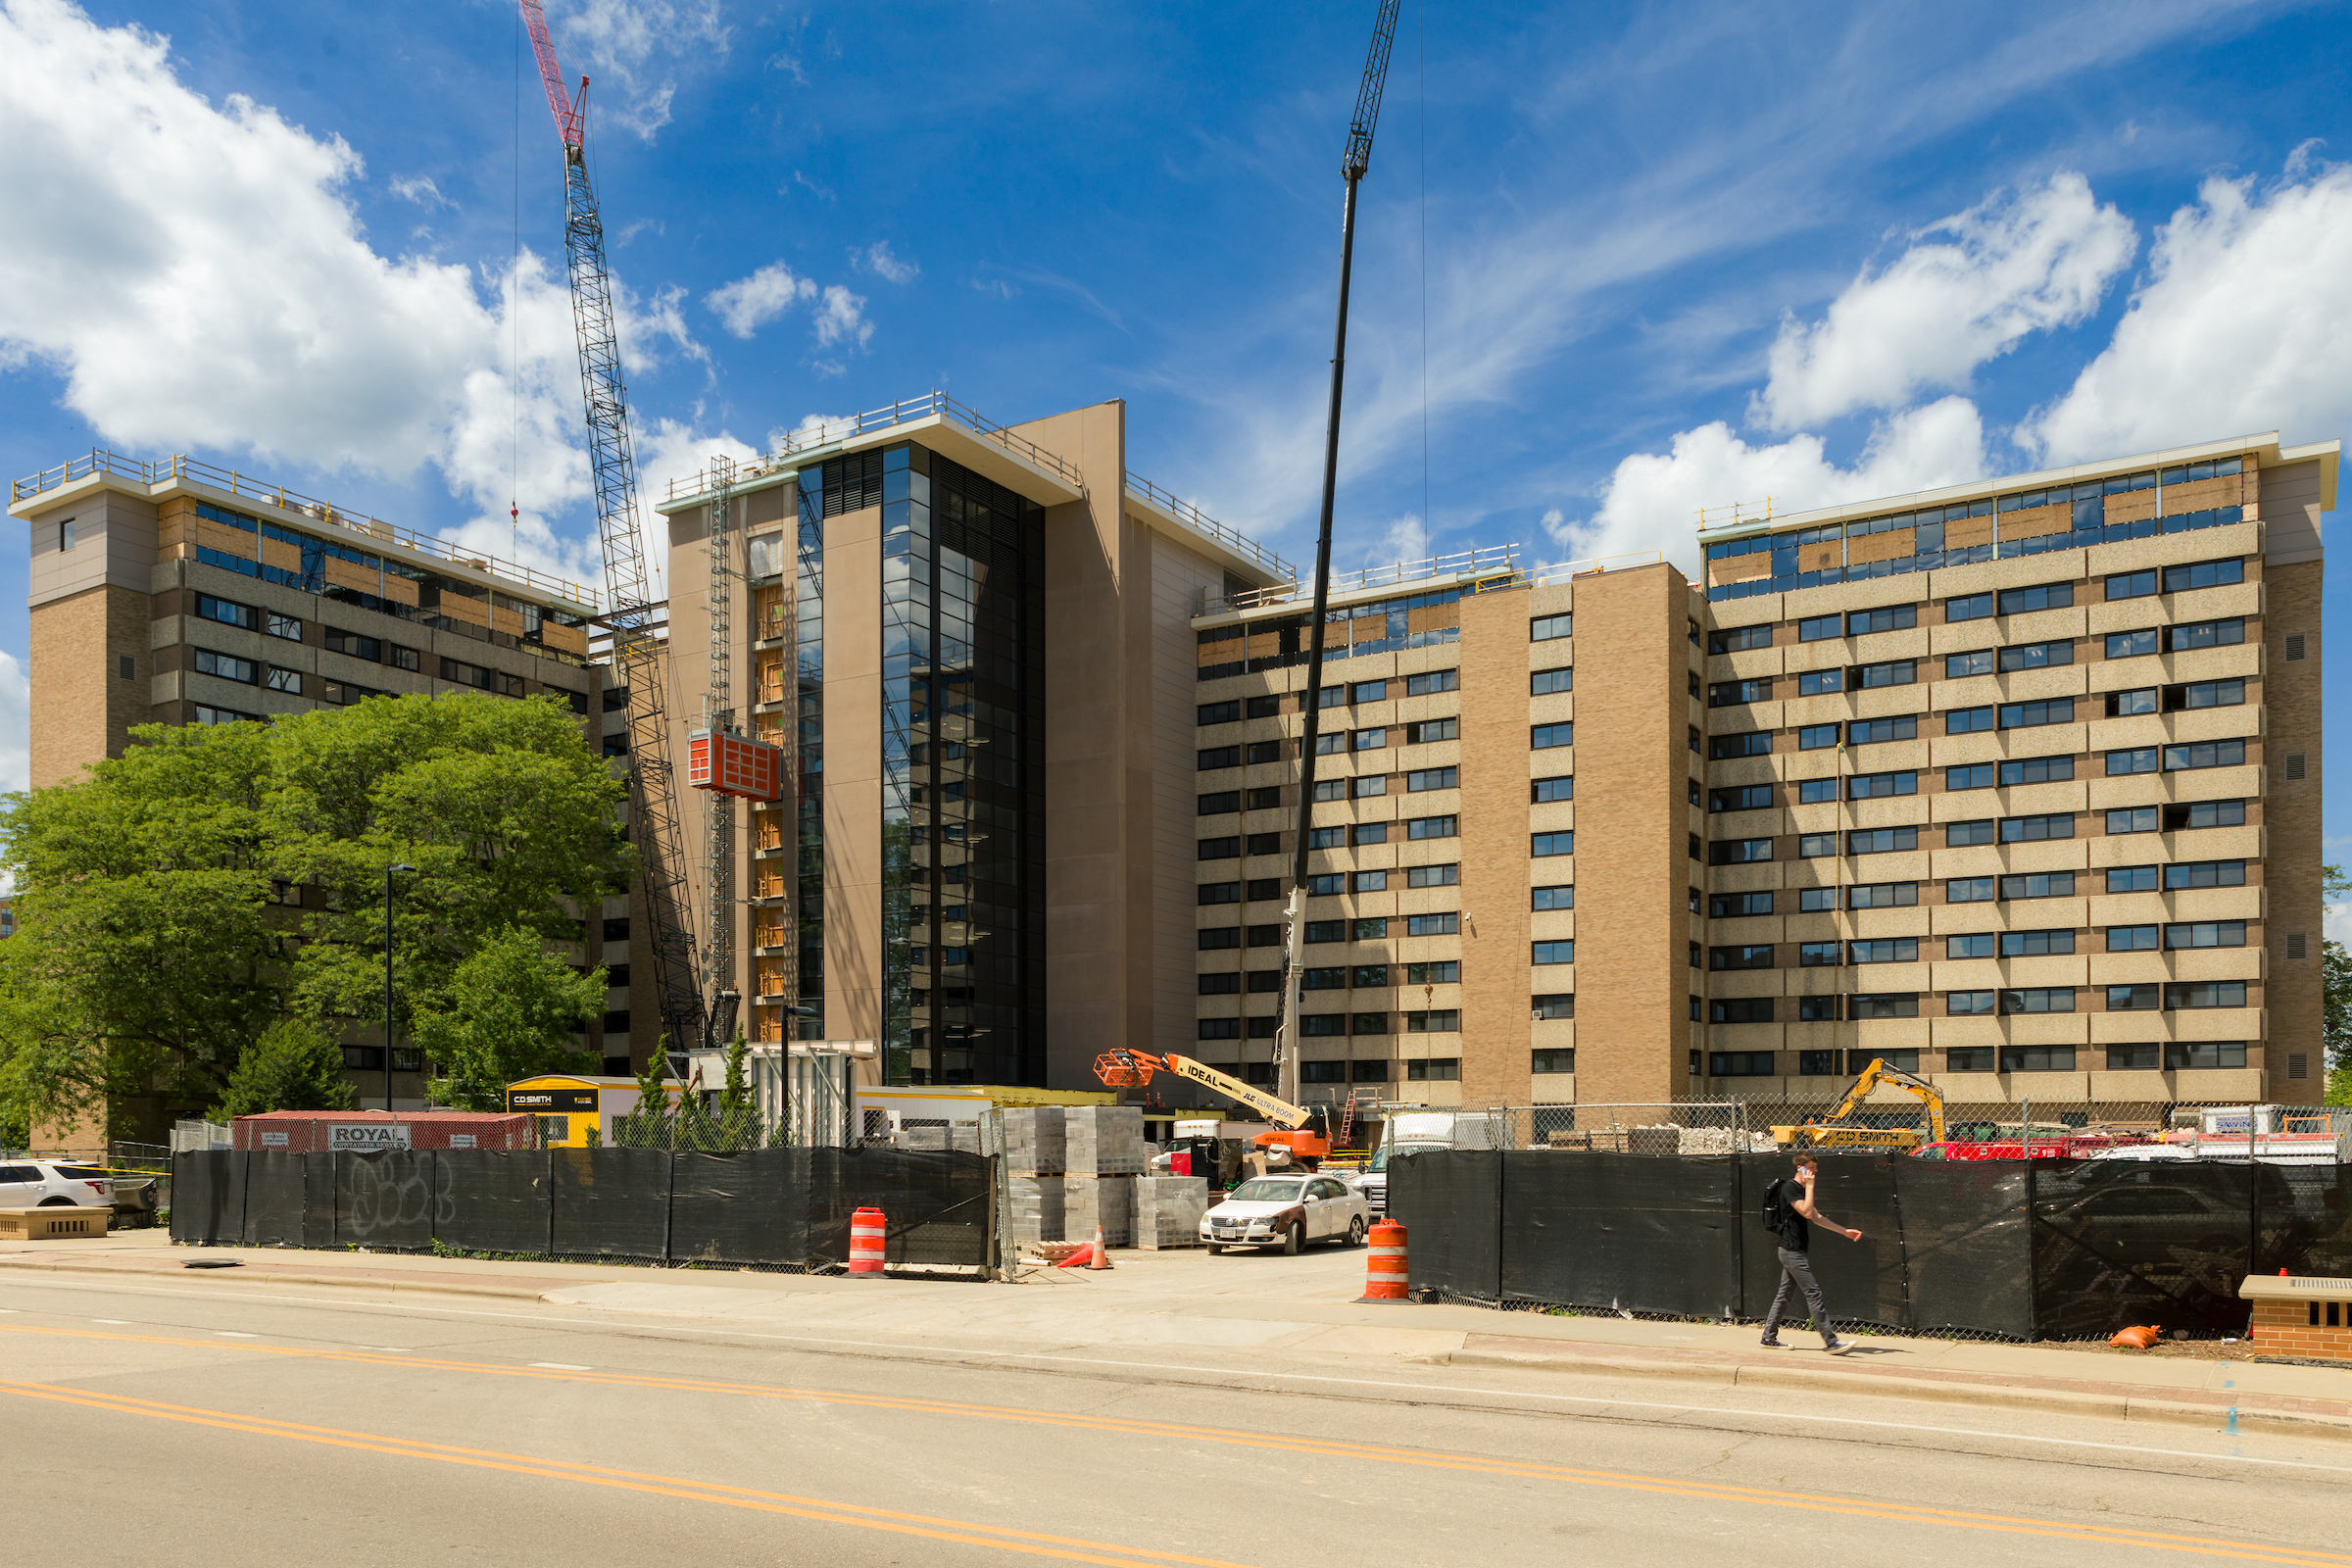 The exterior of Sellery Residence Hall under construction during summer months